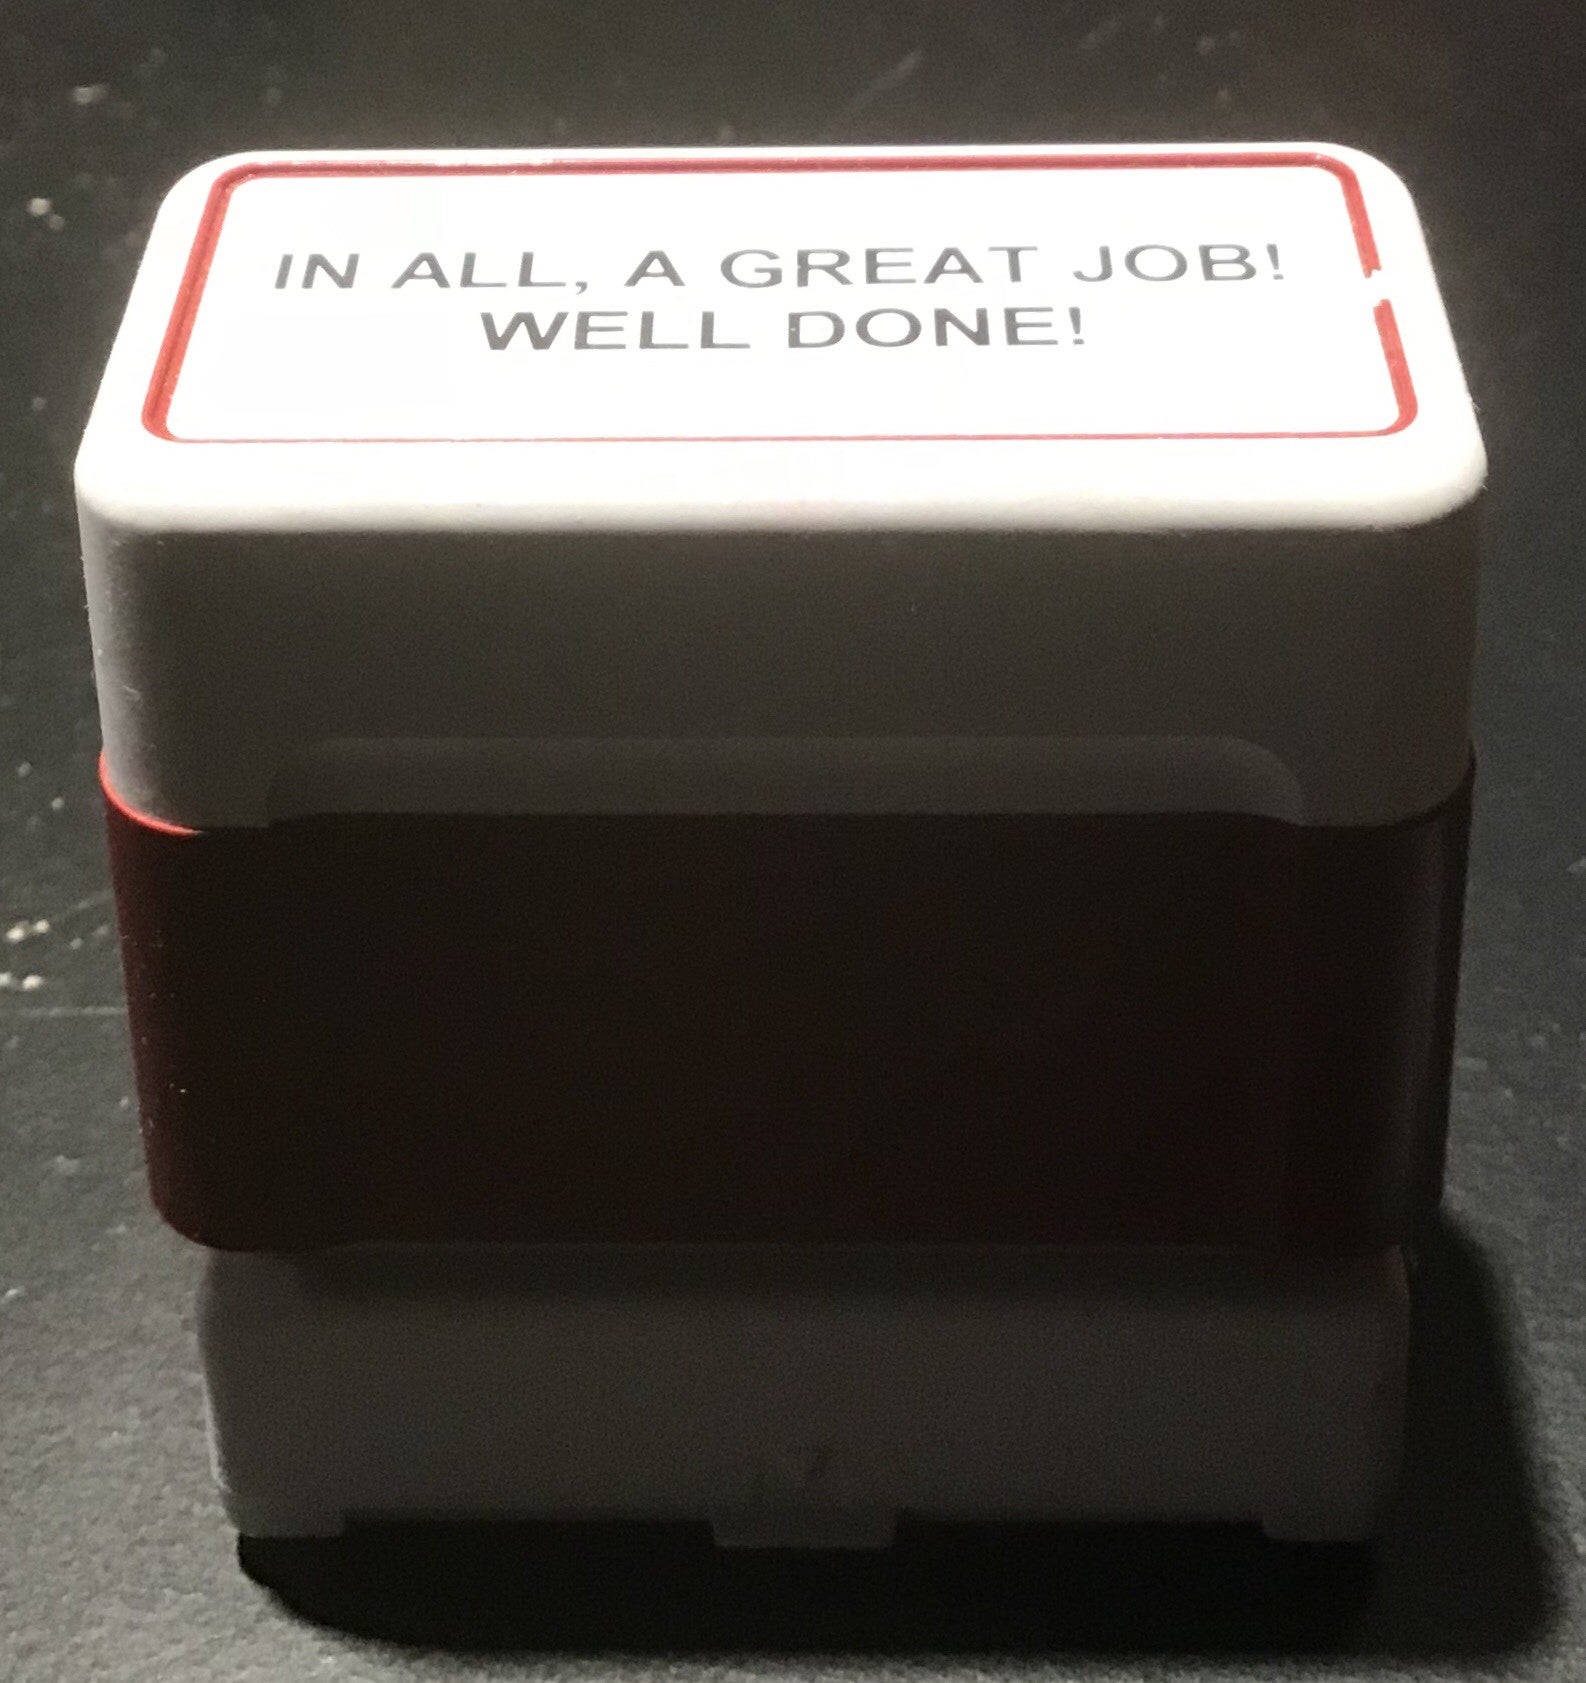 an ink stamp that says &quot;In all, a great job! Well done!&quot;